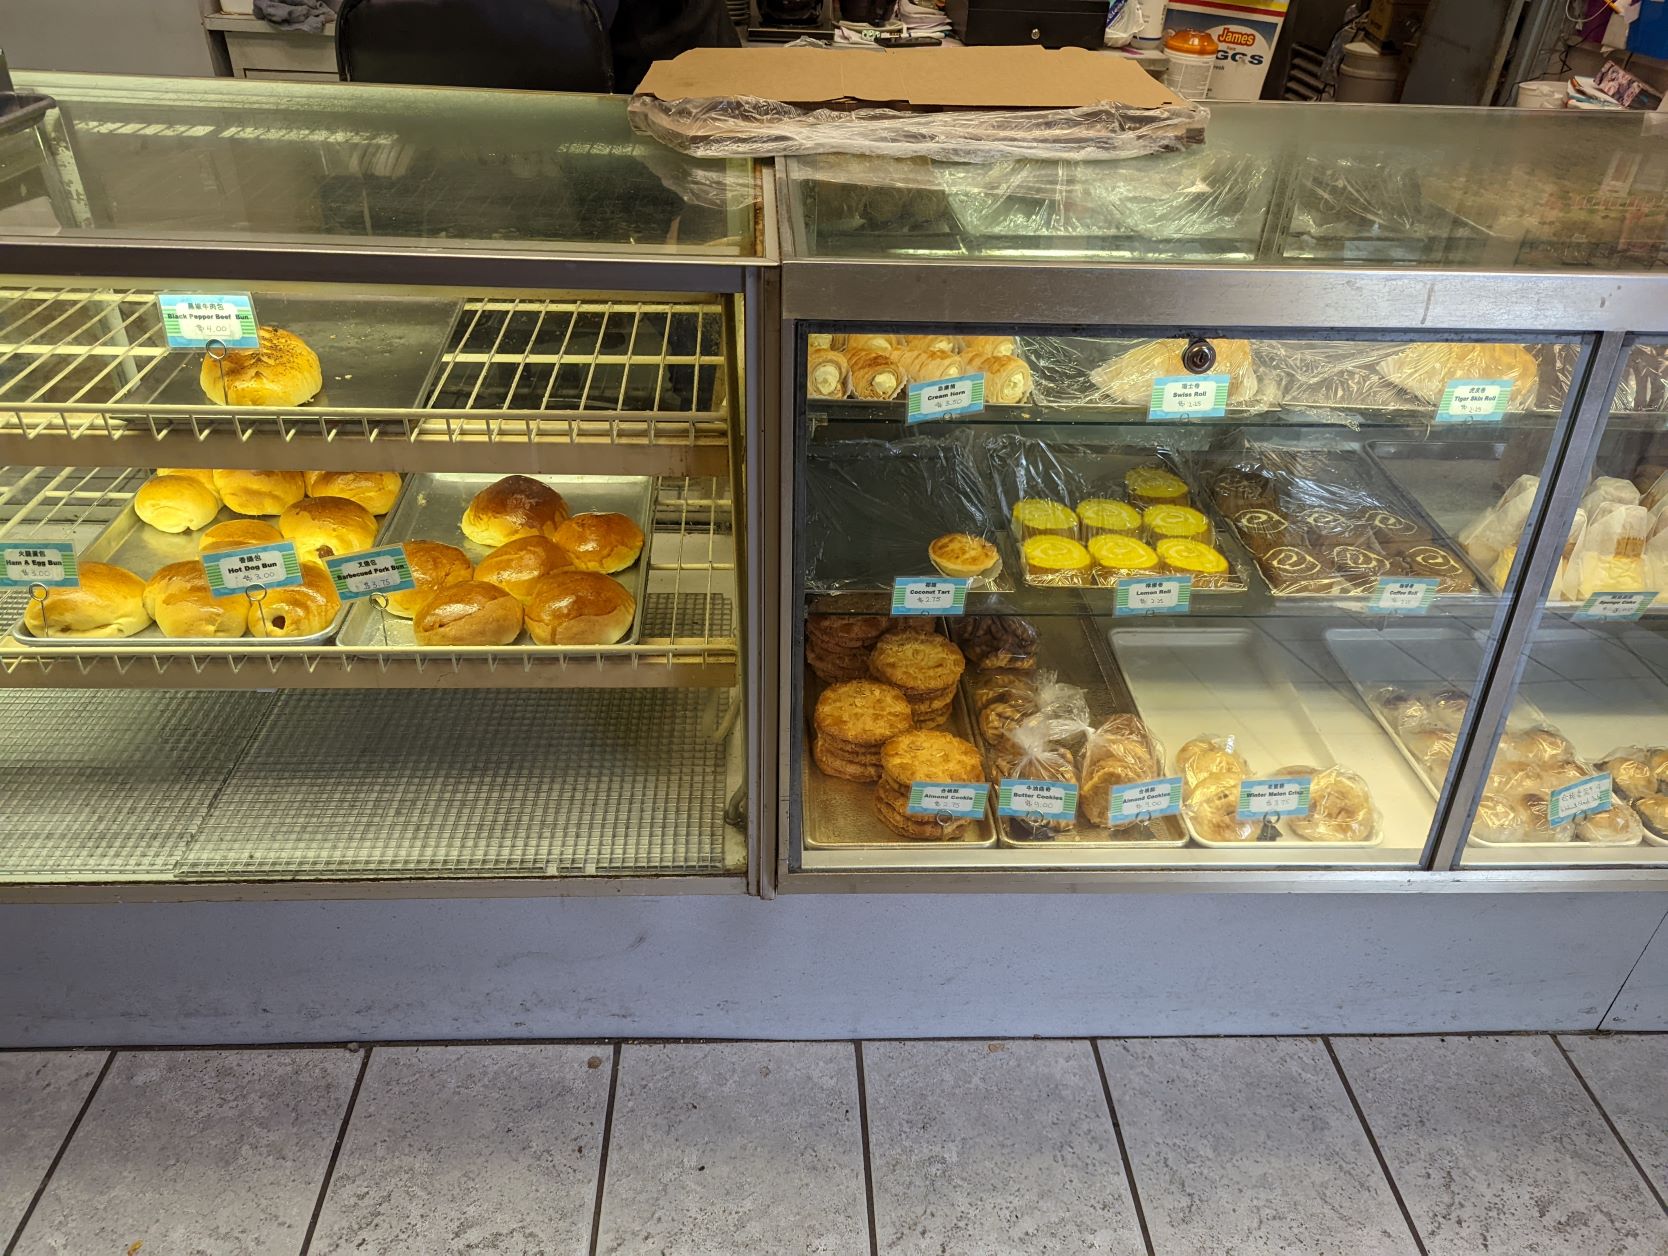 A display case with Chinese baked goods